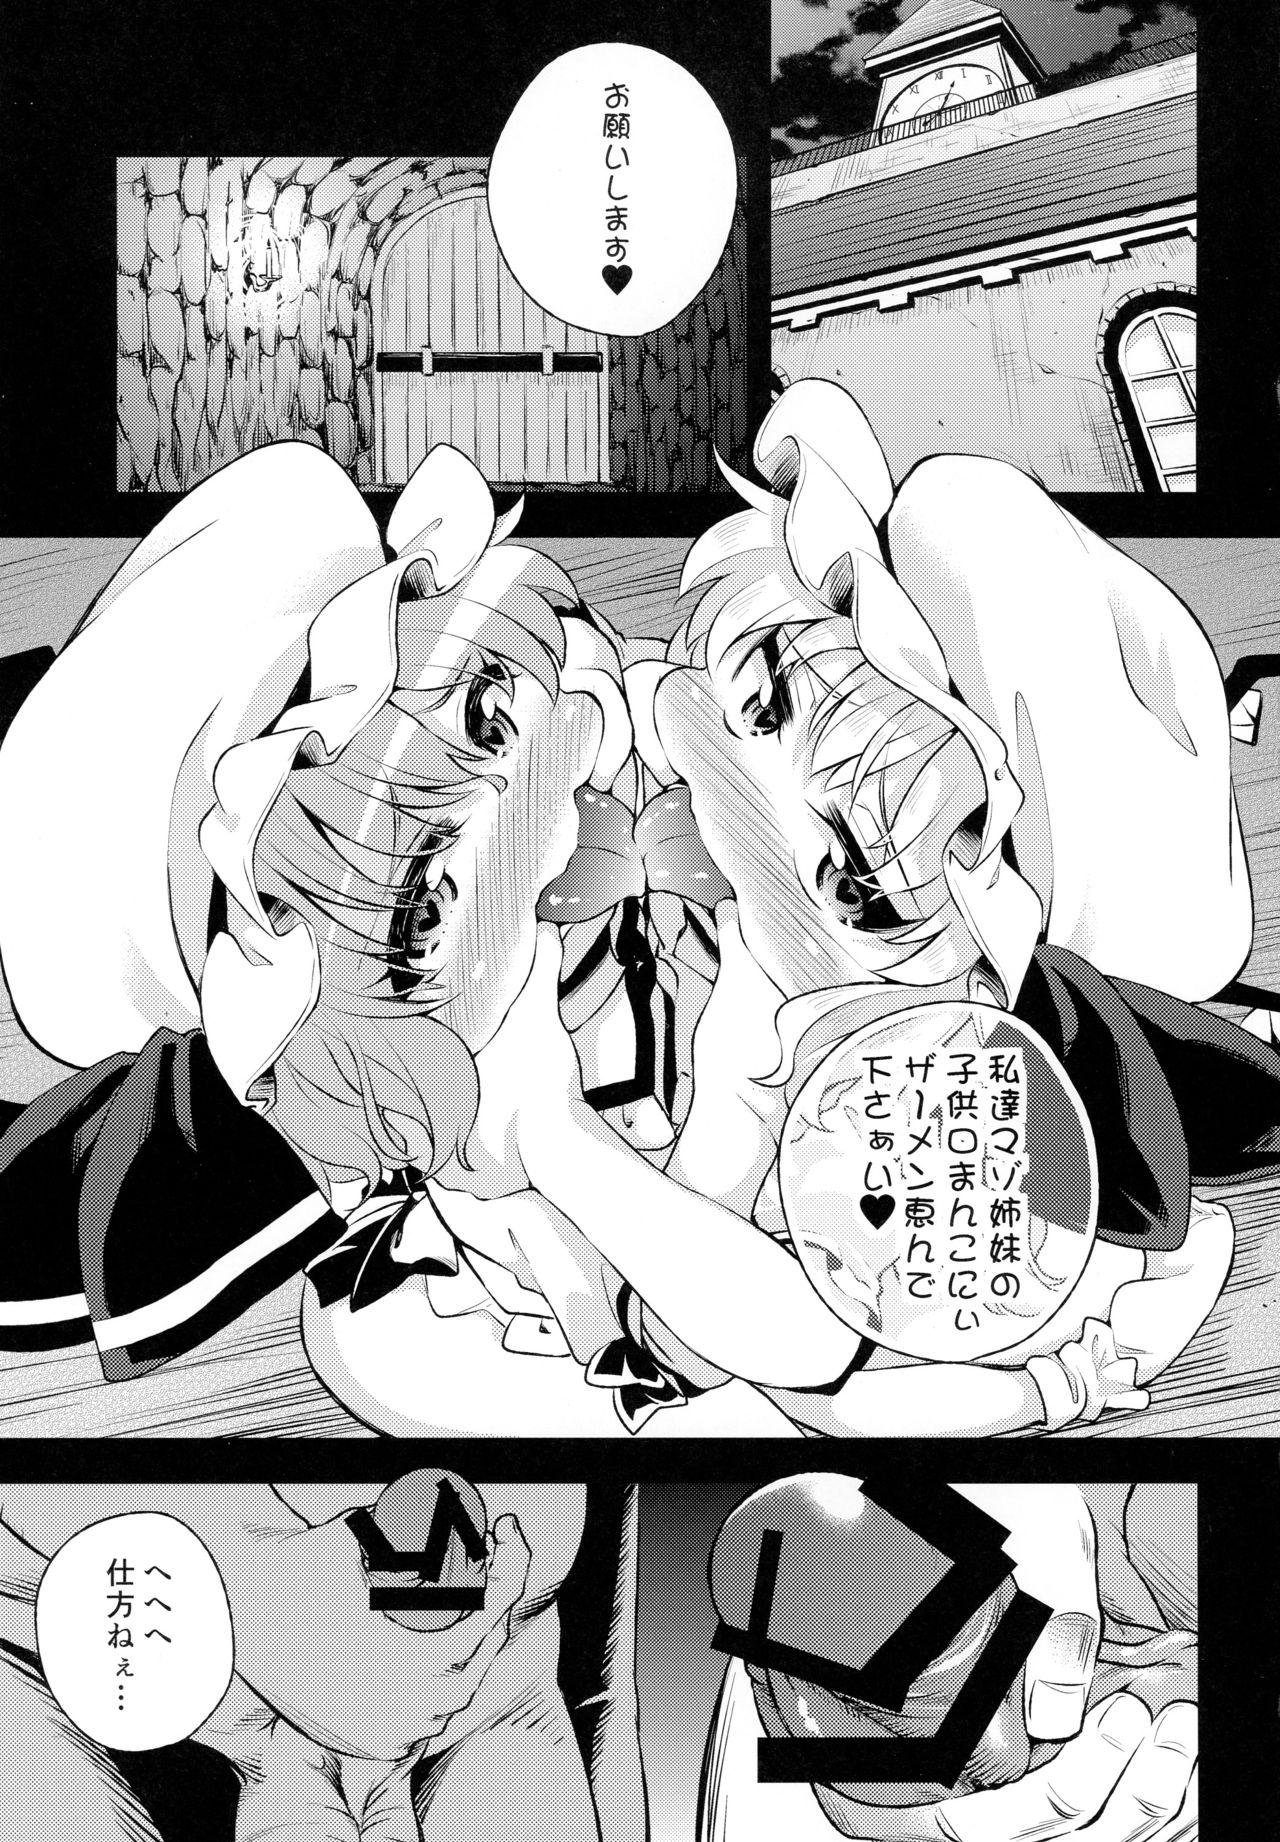 Publico Scarlet Hearts 4 - Touhou project Enema - Page 4